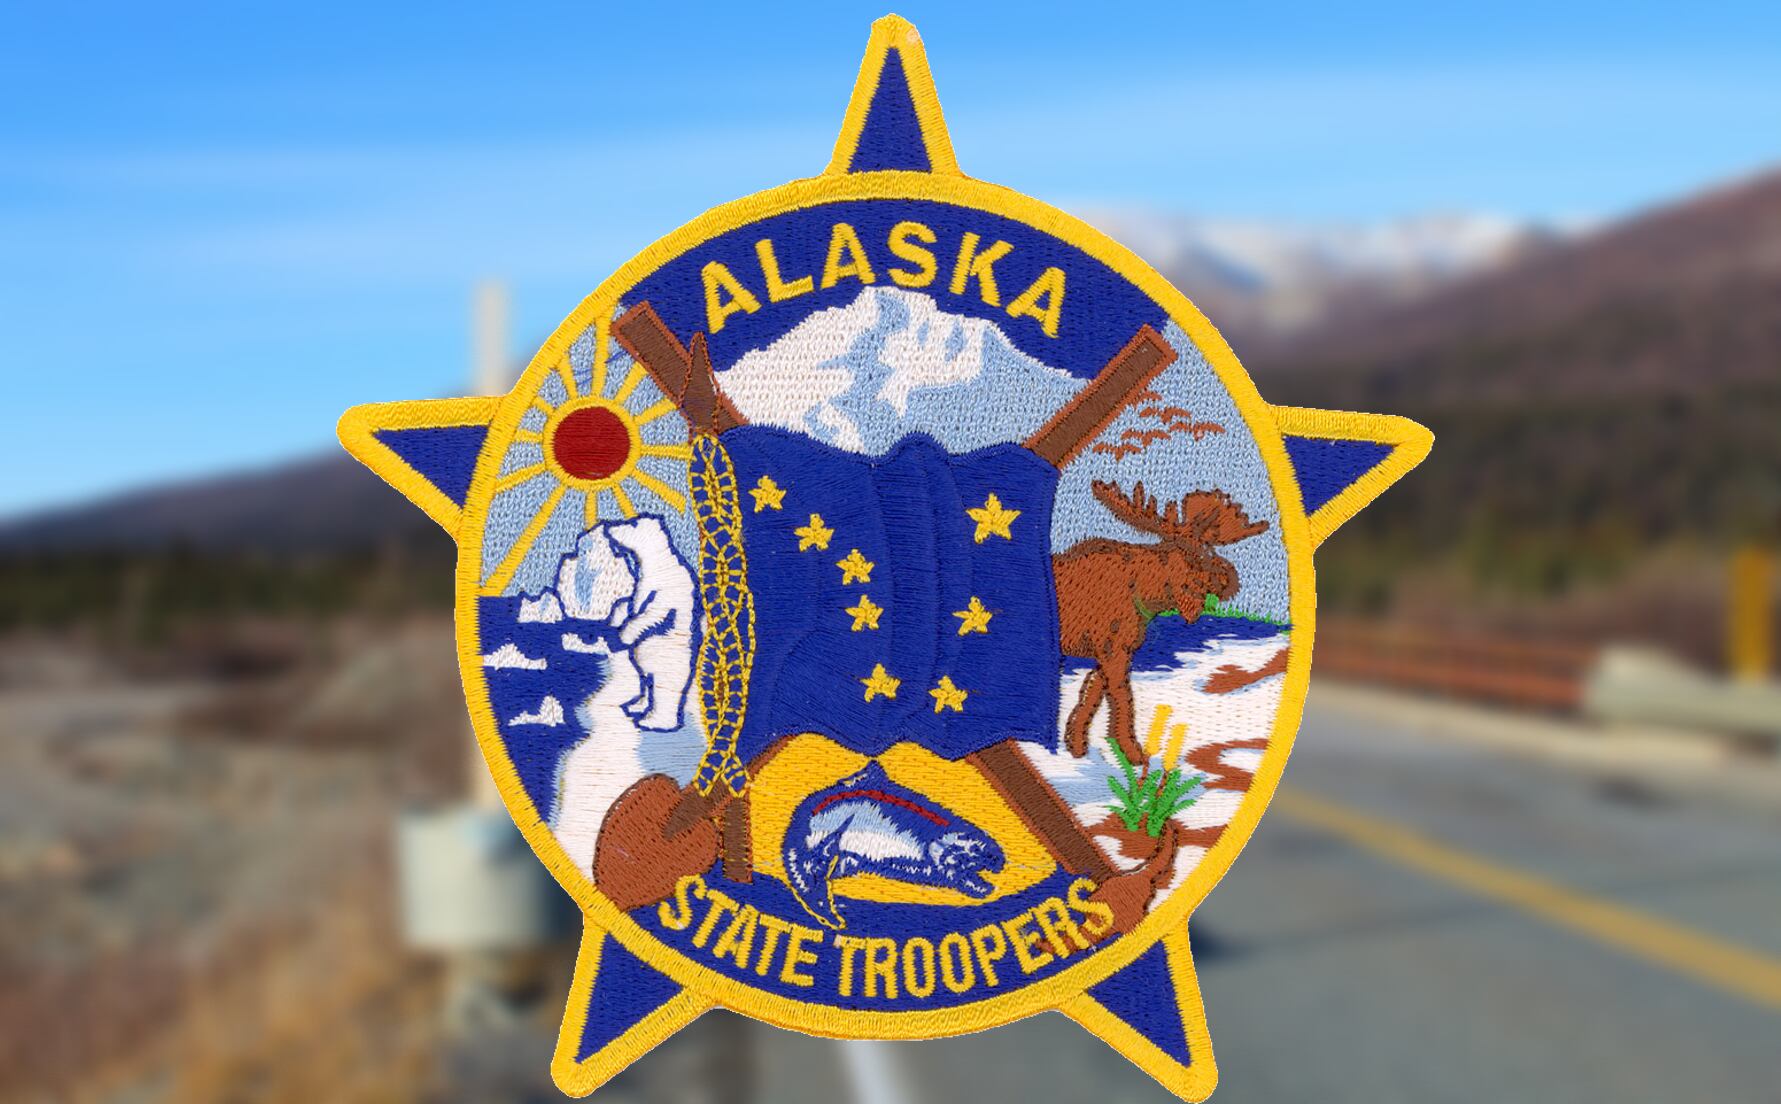 Alaska State Troopers patch